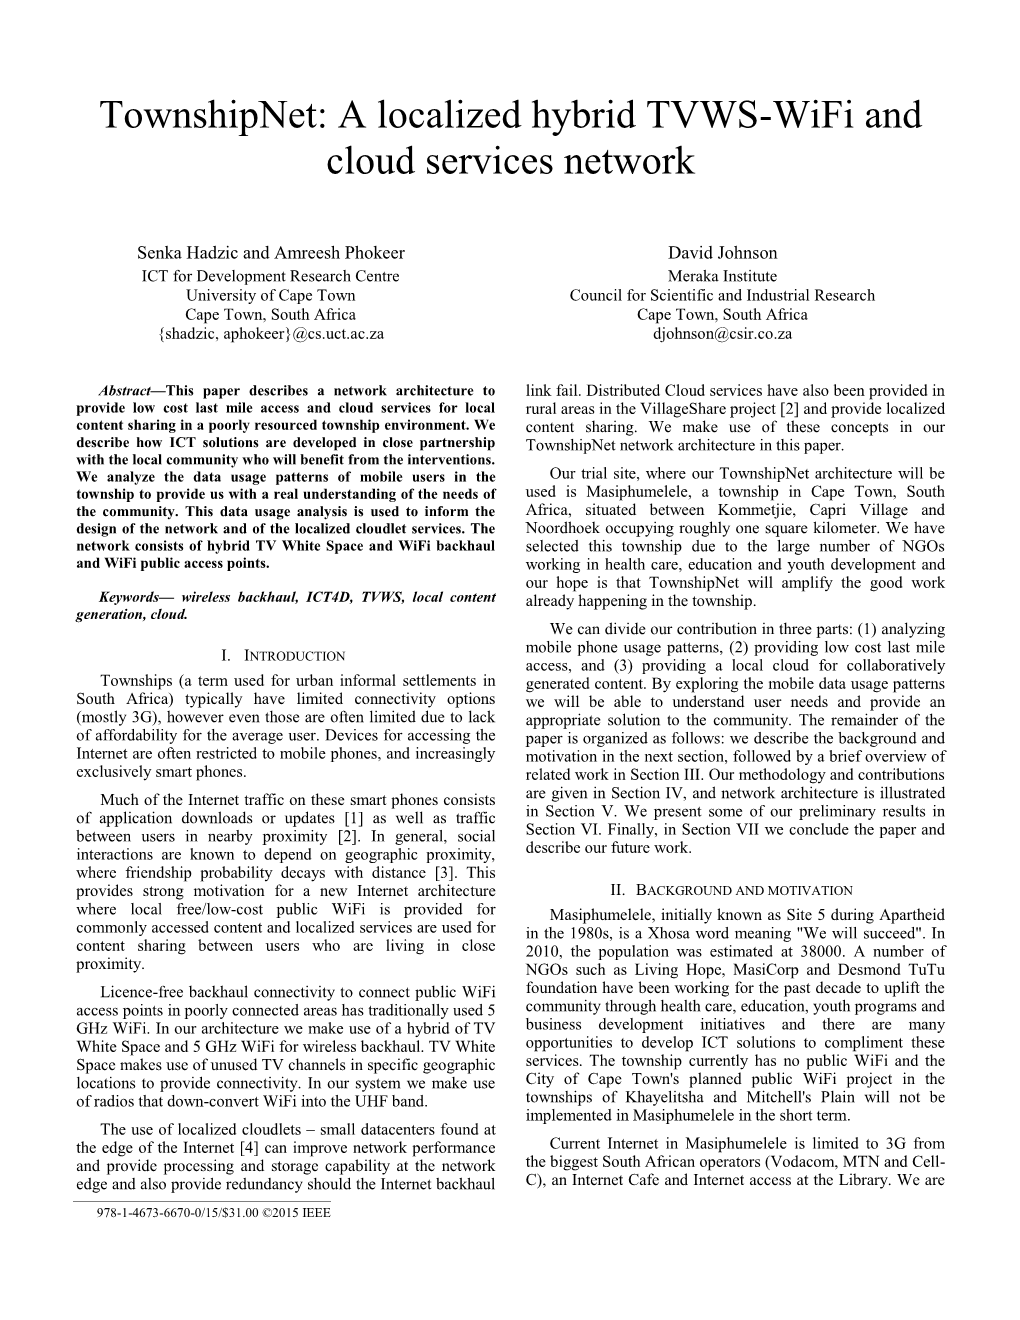 A Localized Hybrid TVWS-Wifi and Cloud Services Network